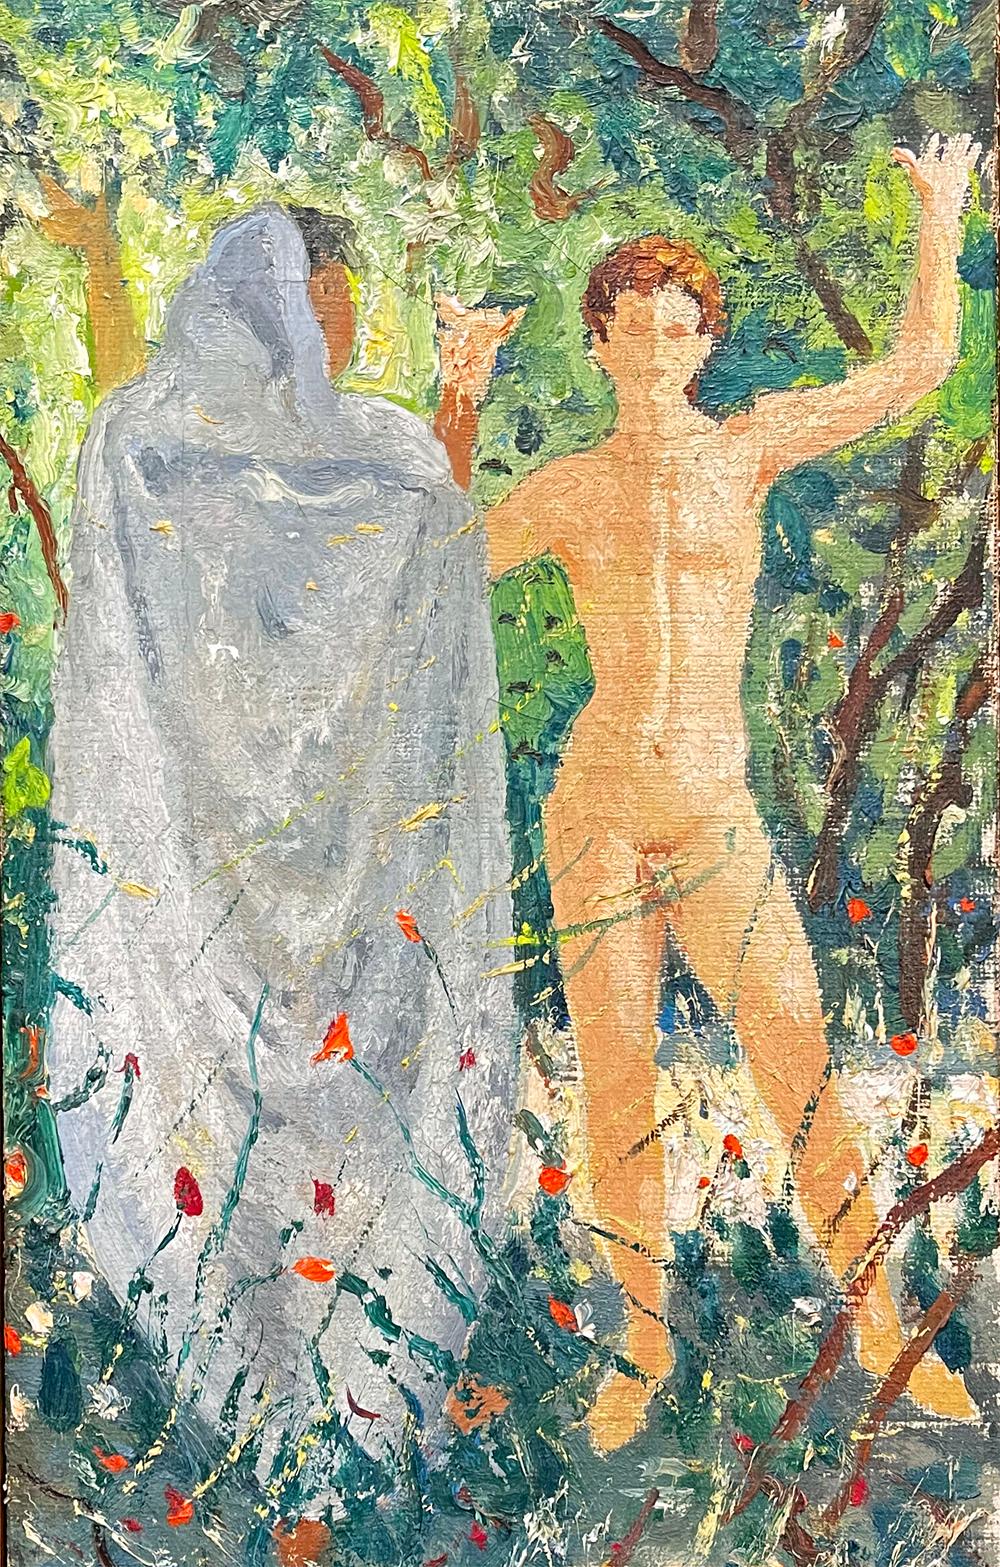 Beautifully painted by Giovanni Colacicchi in rich, verdant colors, this depiction of a nude, youthful Adam figure in the midst of the Garden of Eden, accompanied by God in a hooded, white robe, is a lovely example of the figural and landscape